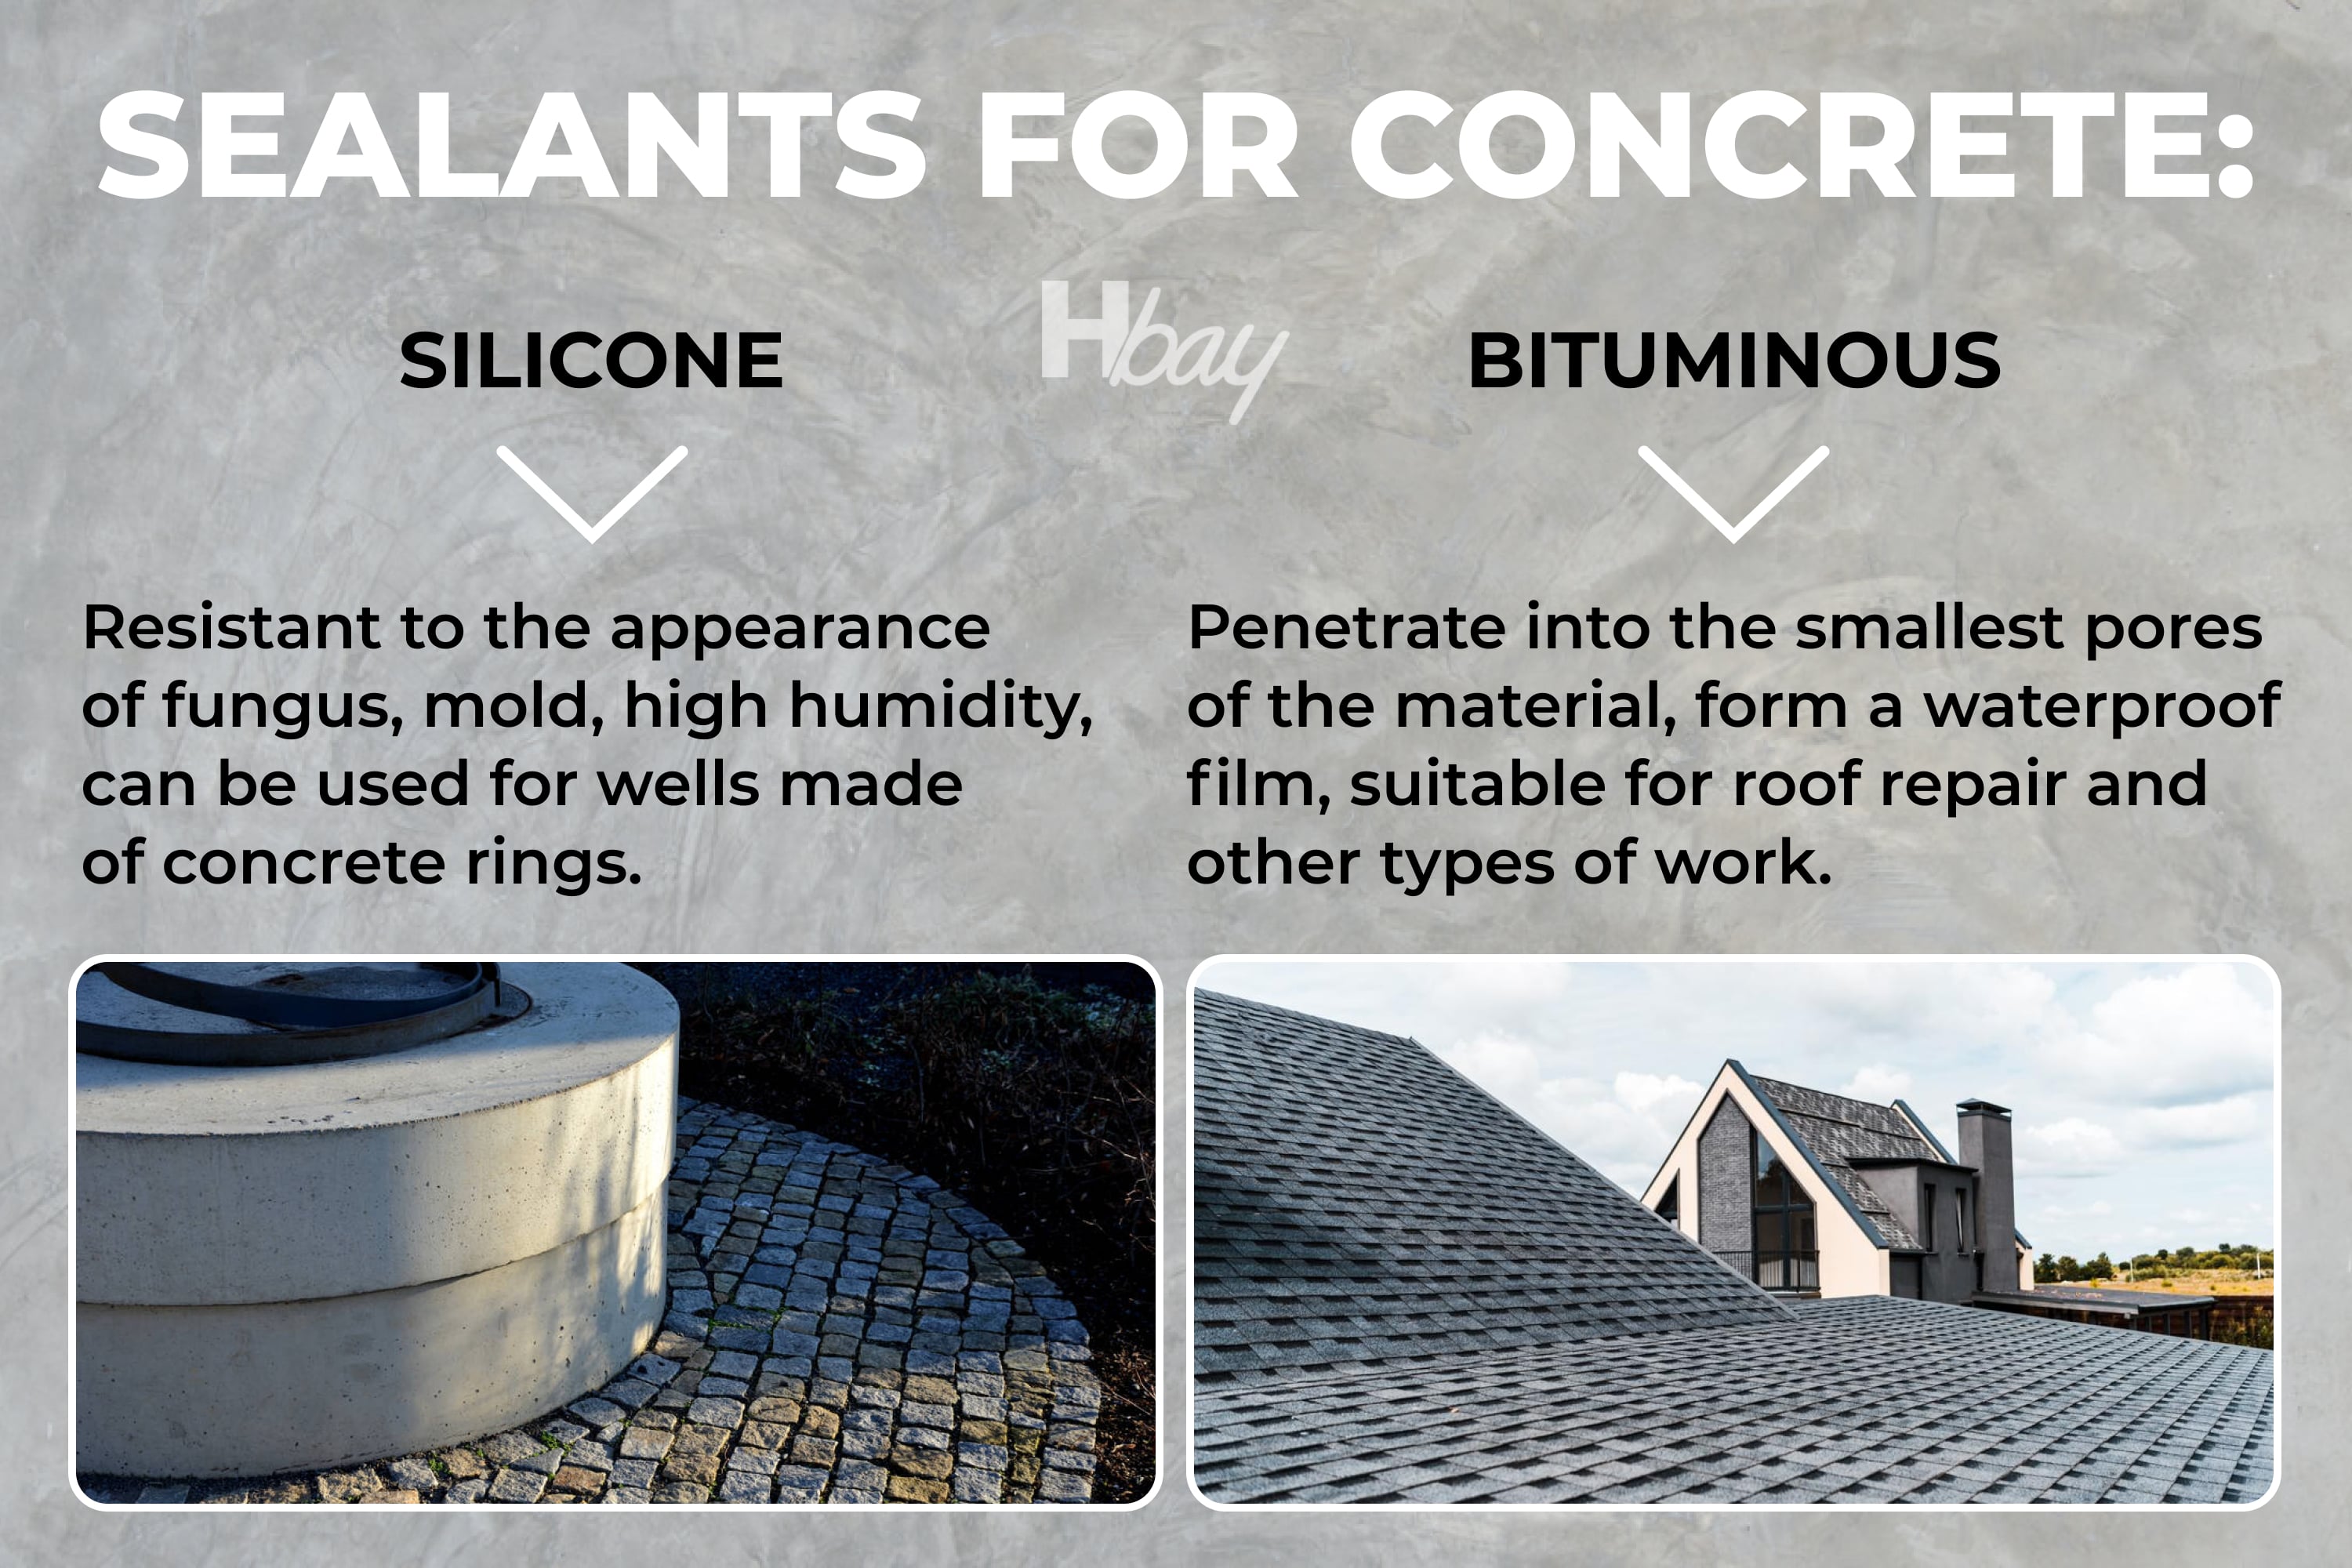 Sealants for concrete purpose and types